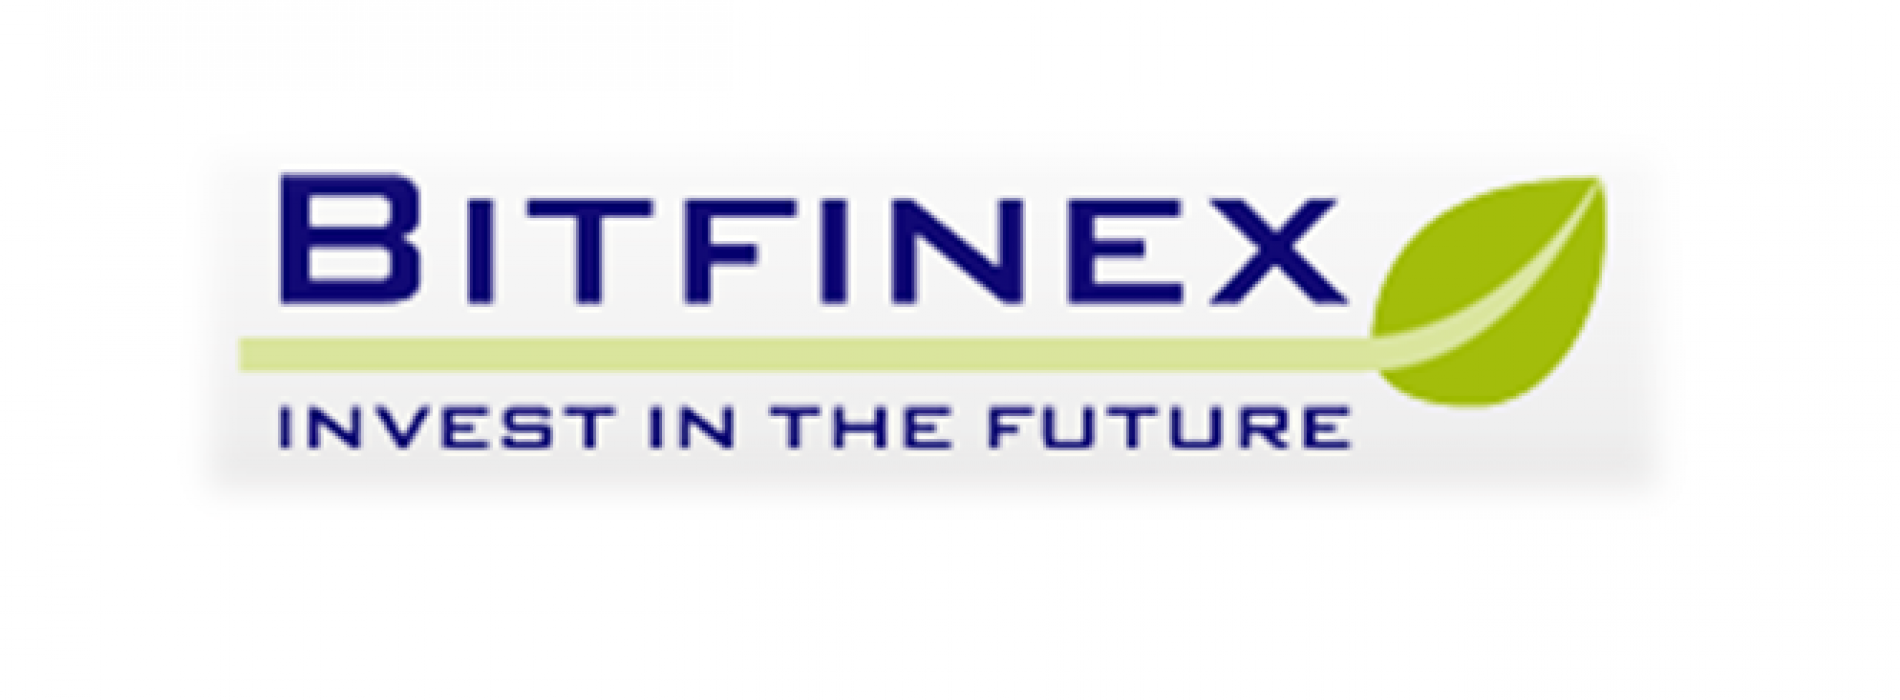 CFTC fines bitcoin exchange Bitfinex $75,000 for illegal off-exchange financial transactions